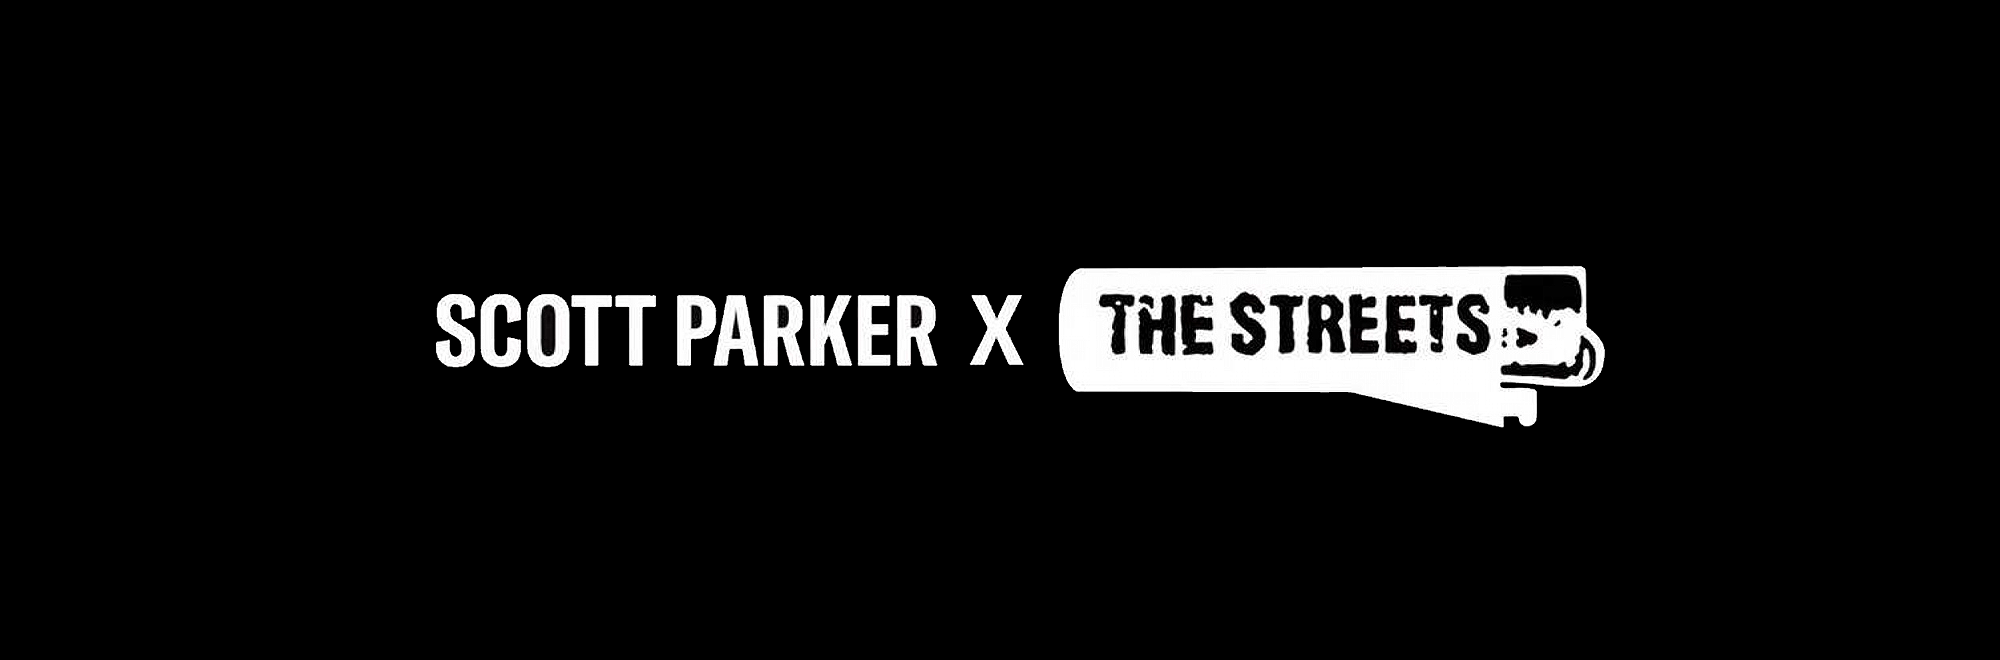 Twitter's meme mashup with Fulham manager Scott Parker and The Streets’ Mike Skinner